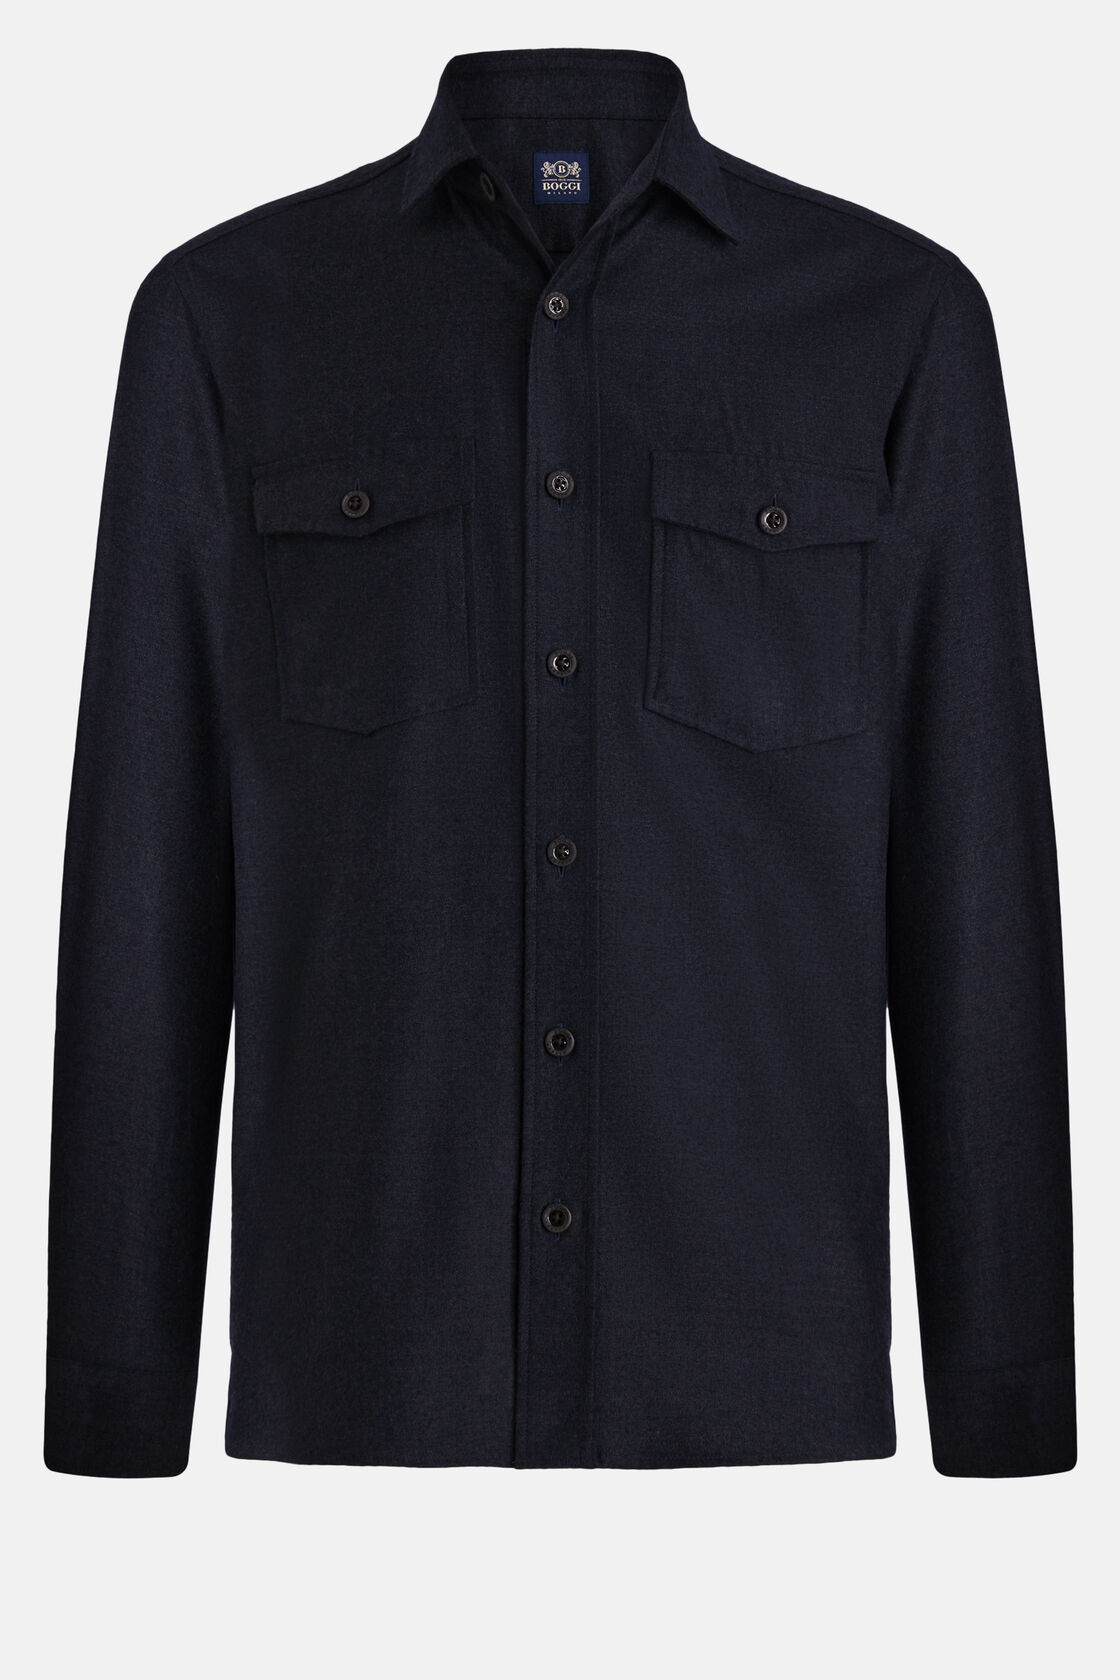 Navy Oversize Crossover Shirt In Flannel, Navy blue, hi-res